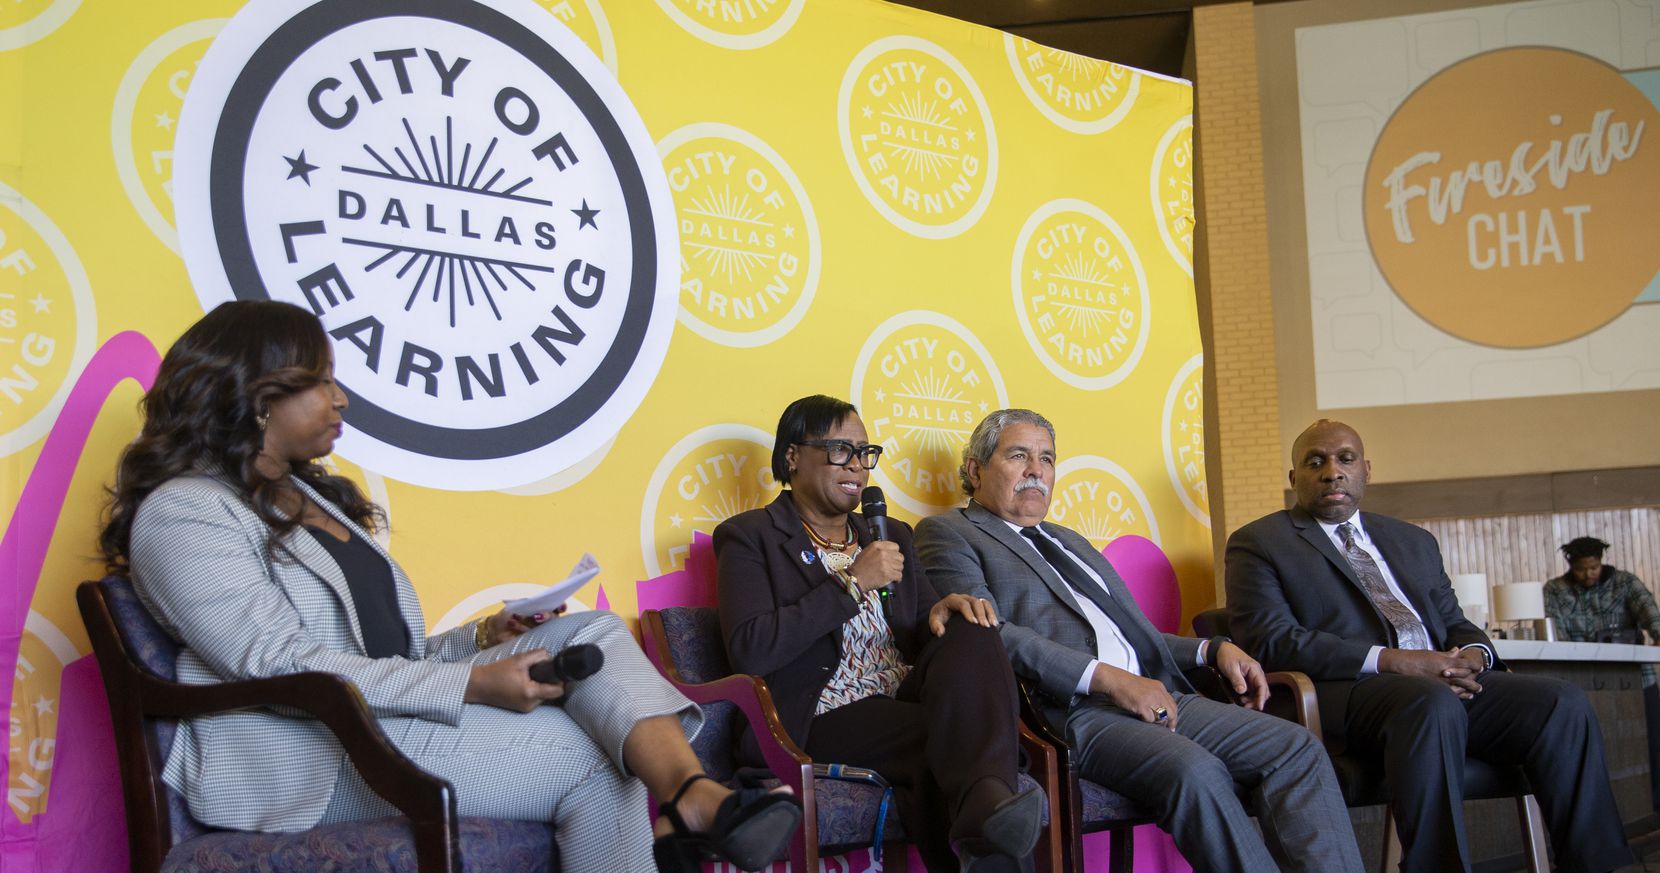 Dallas Mavericks CEO Cynt Marshall speaks alongside DISD Superintendent Michael Hinojosa and City Manager T.C. Broadnax during the Dallas City of Learning Fireside chat on Dec. 2, 2019 in Dallas. Dallas City of Learning leaders shared the results of their 2019 summer program and awards during the event. (Juan Figueroa/ The Dallas Morning News)